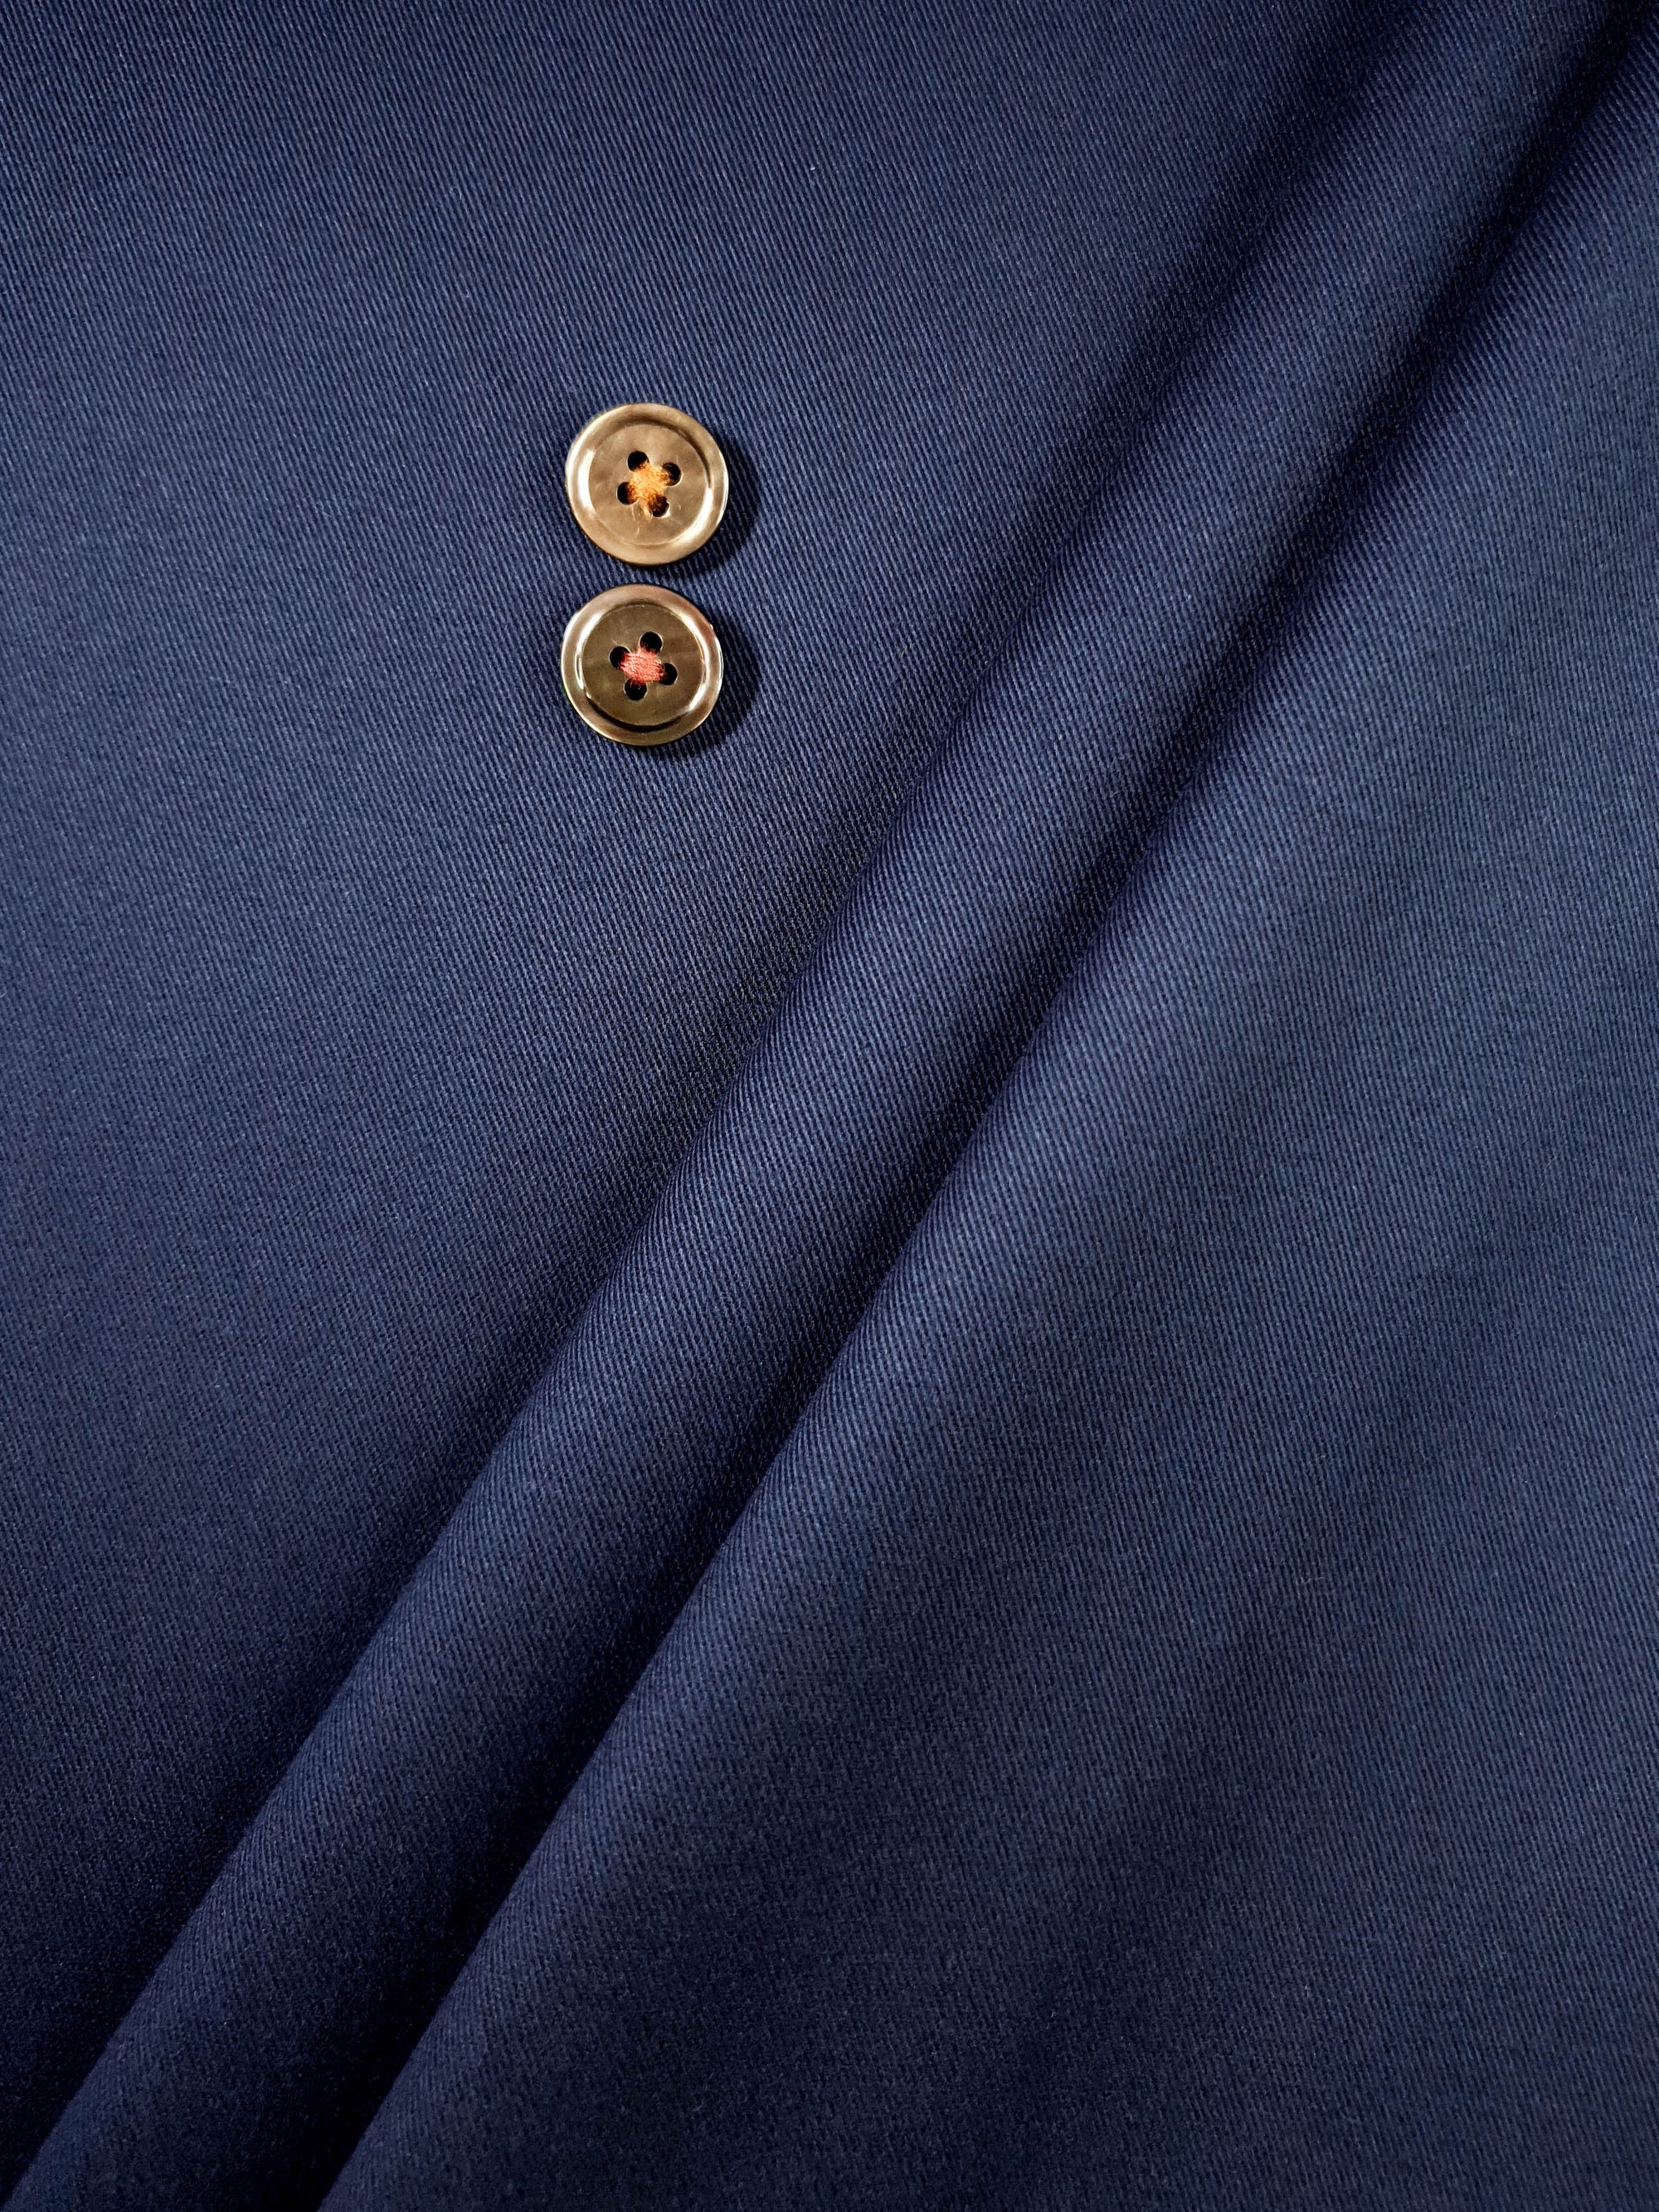 HUBERROSS Blue Color Brushed Cotton Twill  with Stretch  97% Cotton 3% Lycra Cloth Made in Italy